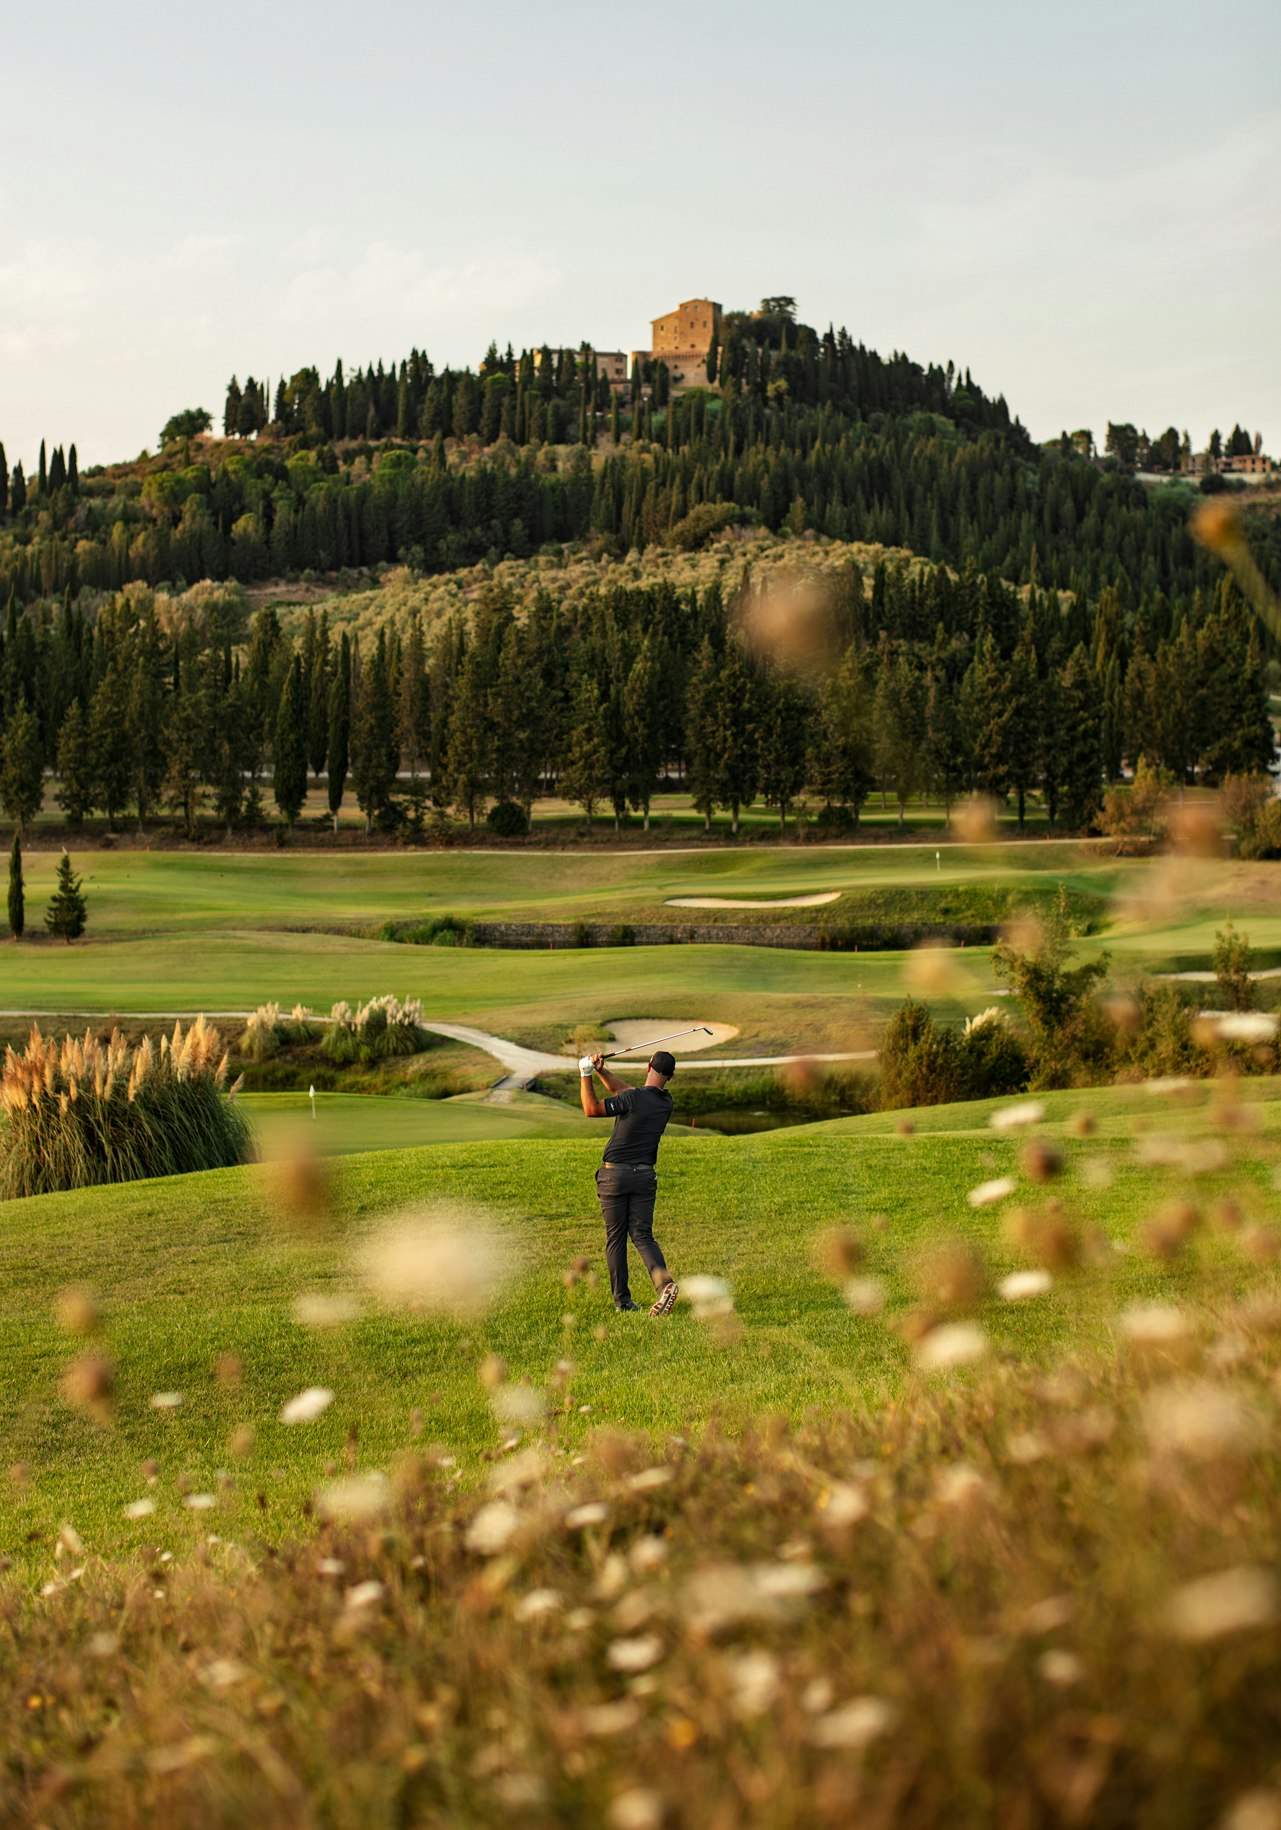 Stay in a 5-star hotel with the biggest golf course of Tuscany